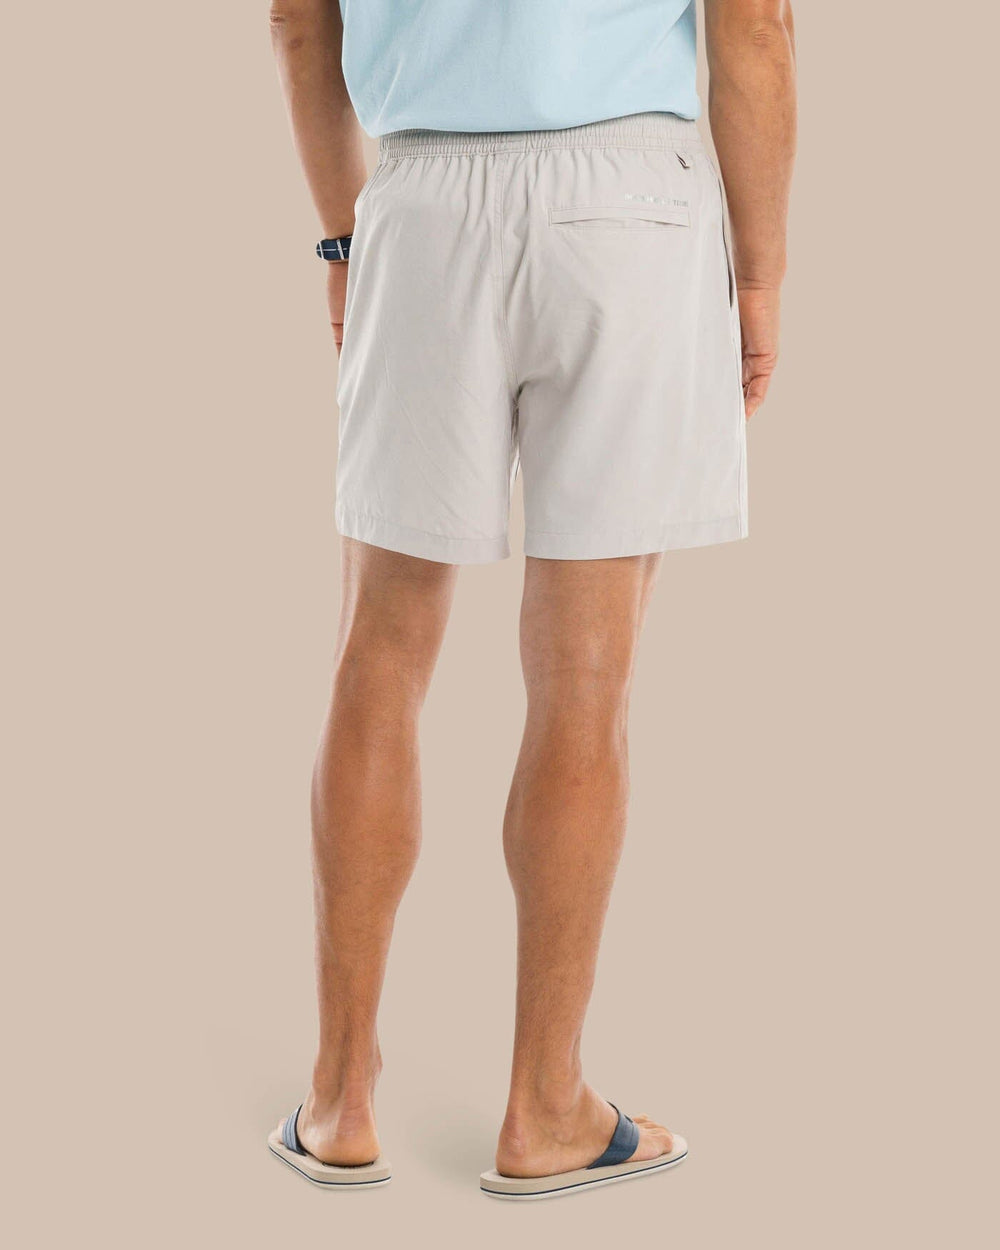 The model back view of the Men's Rip Channel 6 Inch Performance Short by Southern Tide - Marble Grey